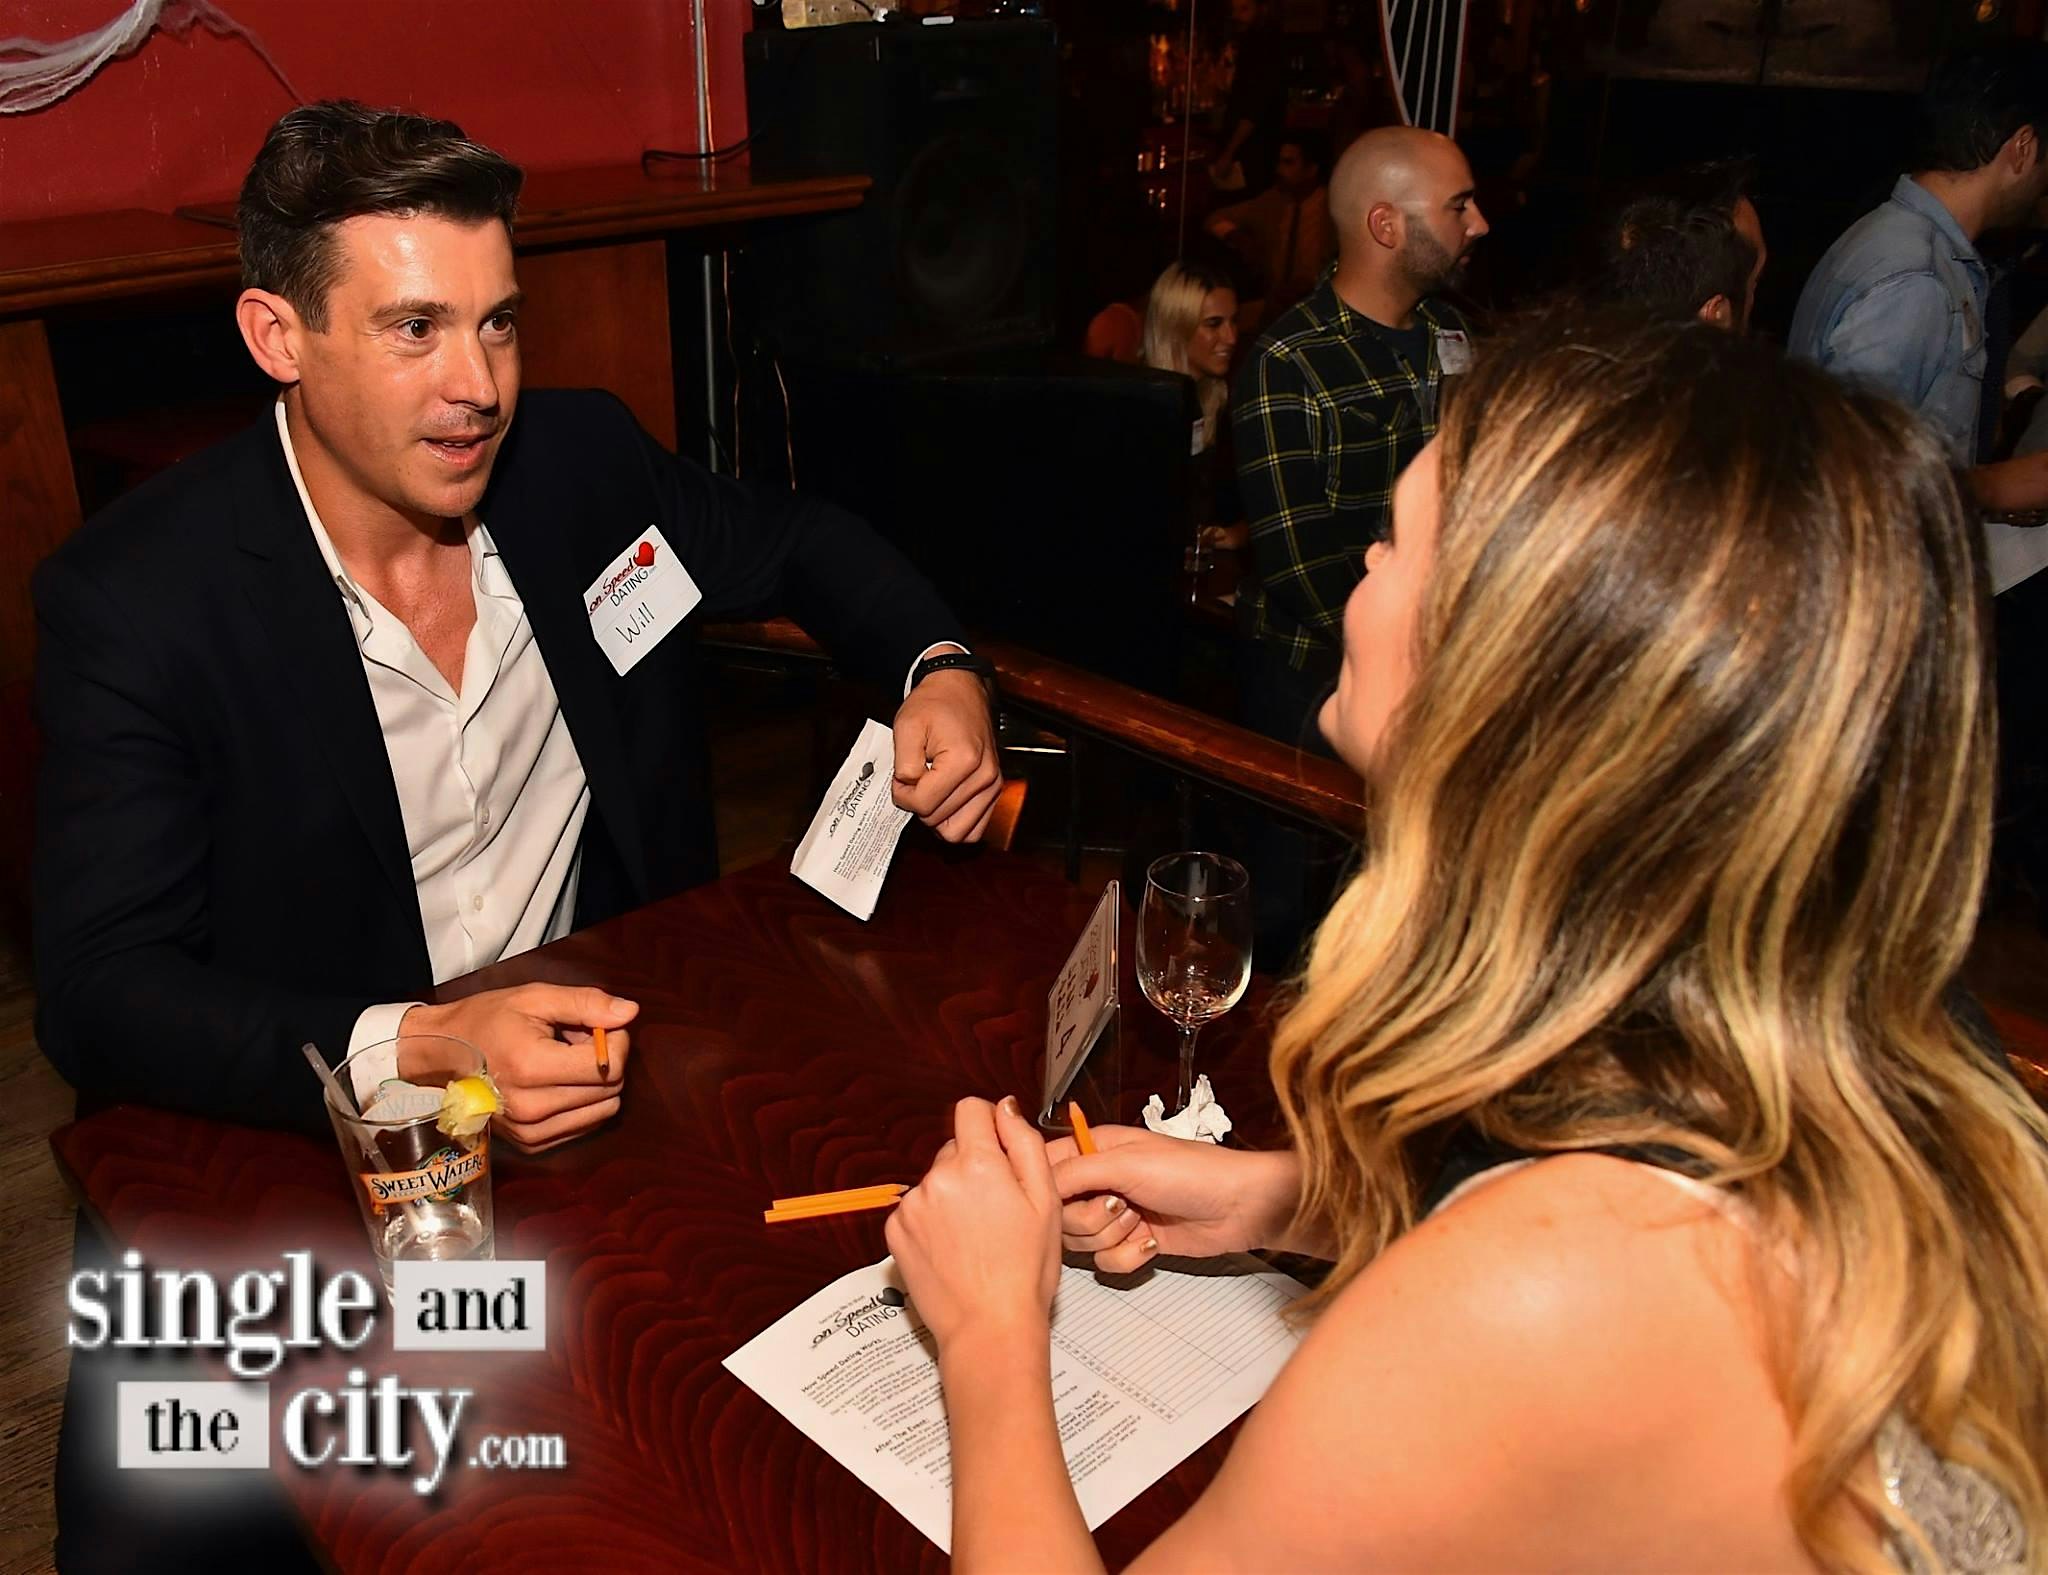 “Slender For Tall” Speed Dating for Men and Women in their 30s & 40s I NYC